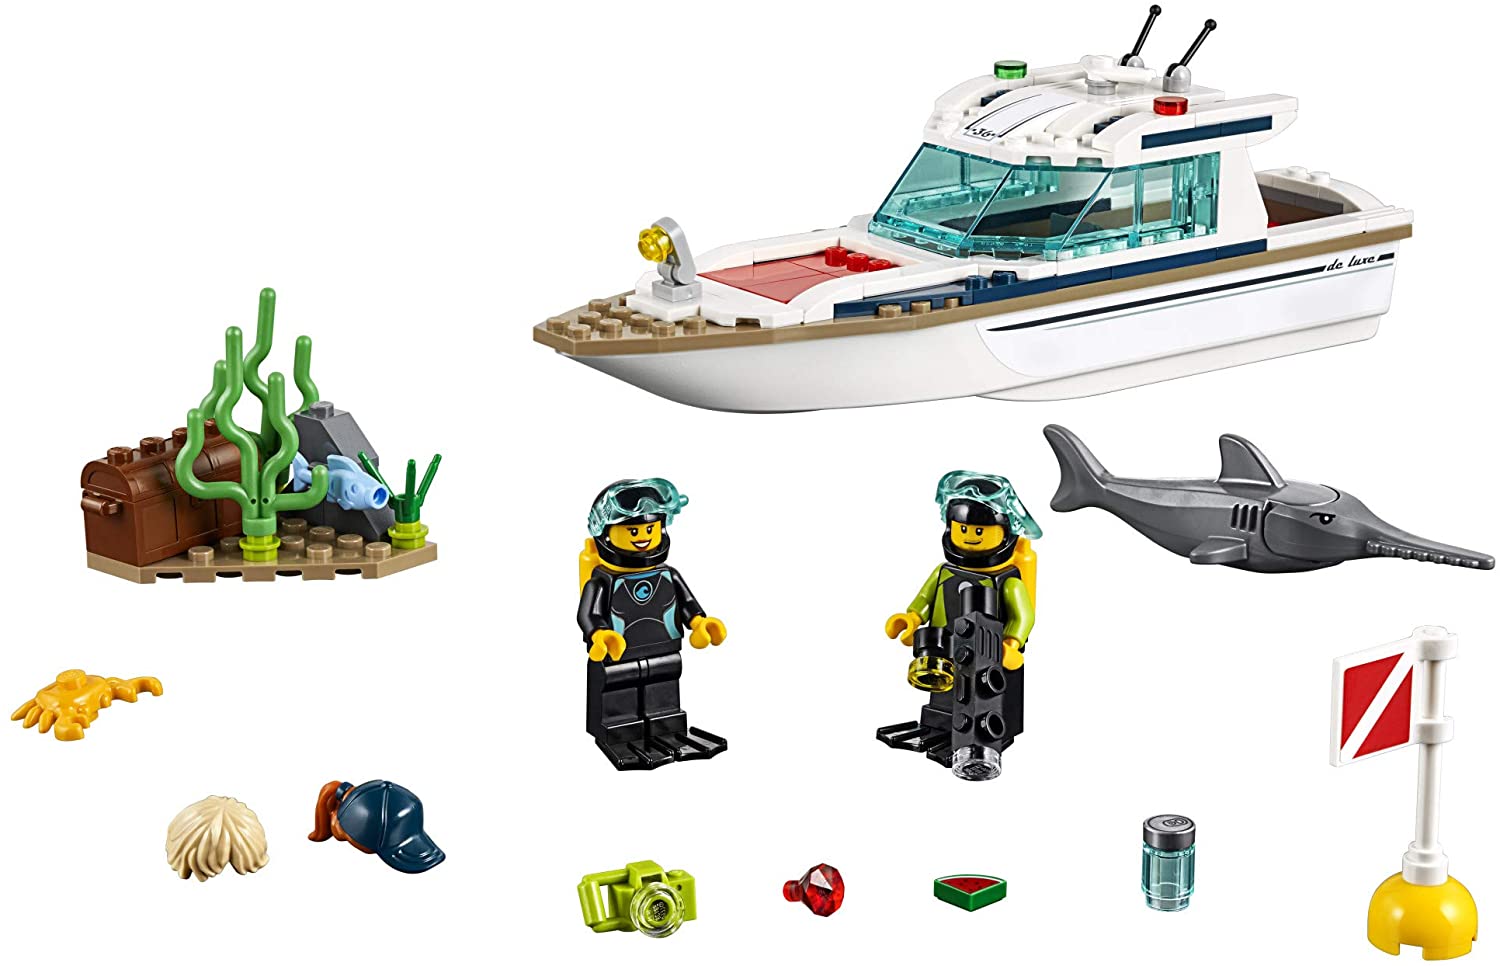 LEGO City Diving Yacht 60221